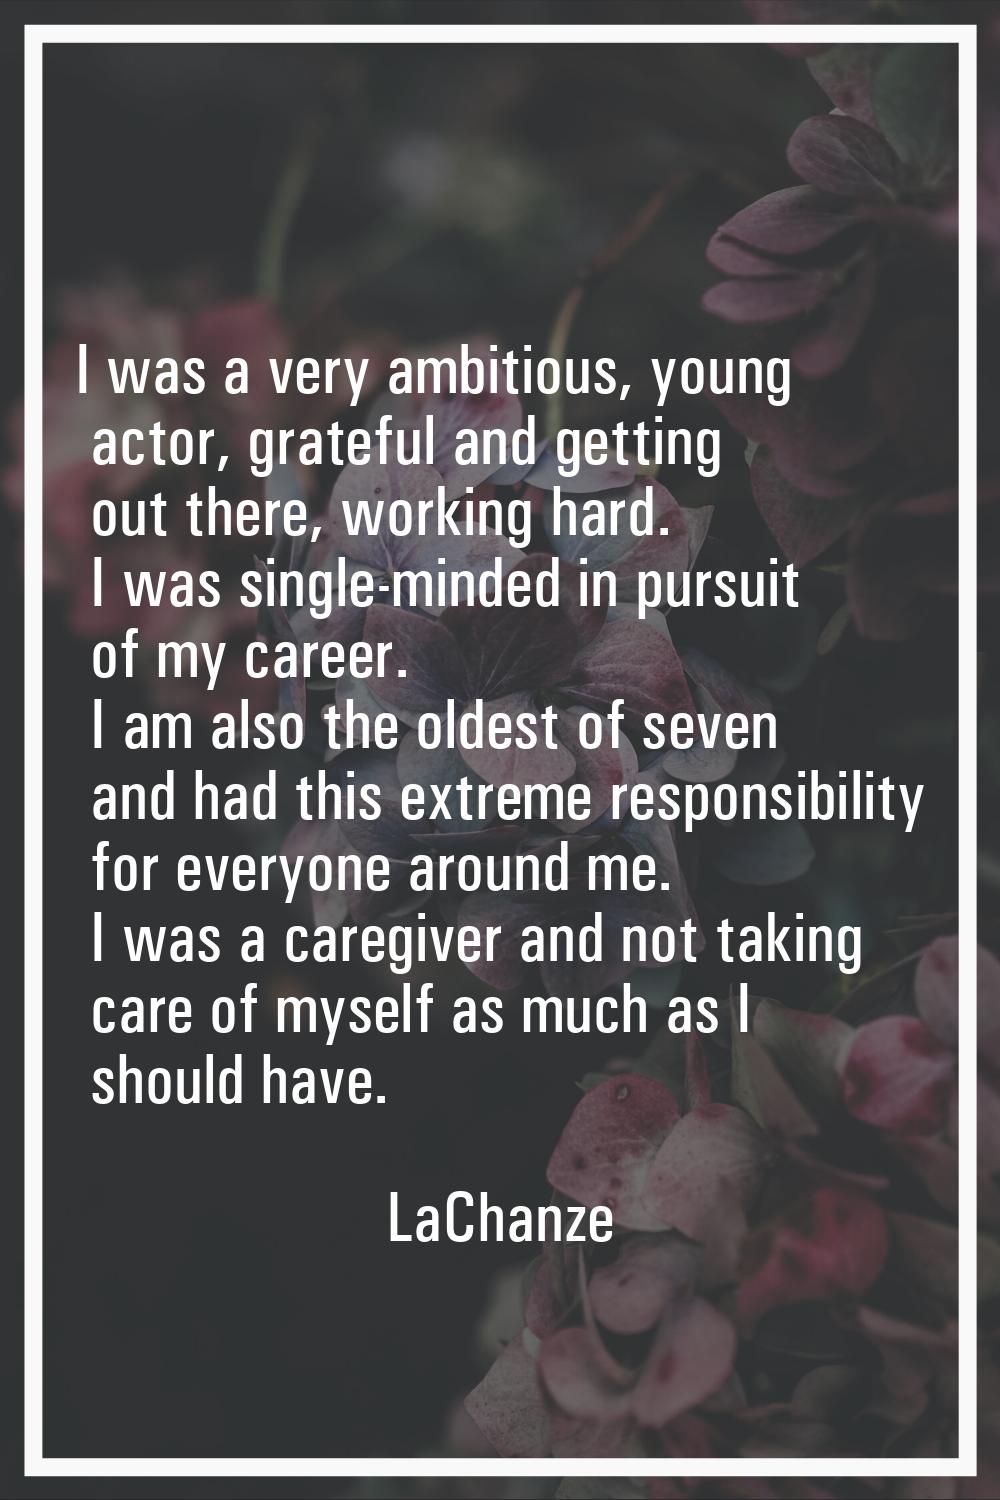 I was a very ambitious, young actor, grateful and getting out there, working hard. I was single-min